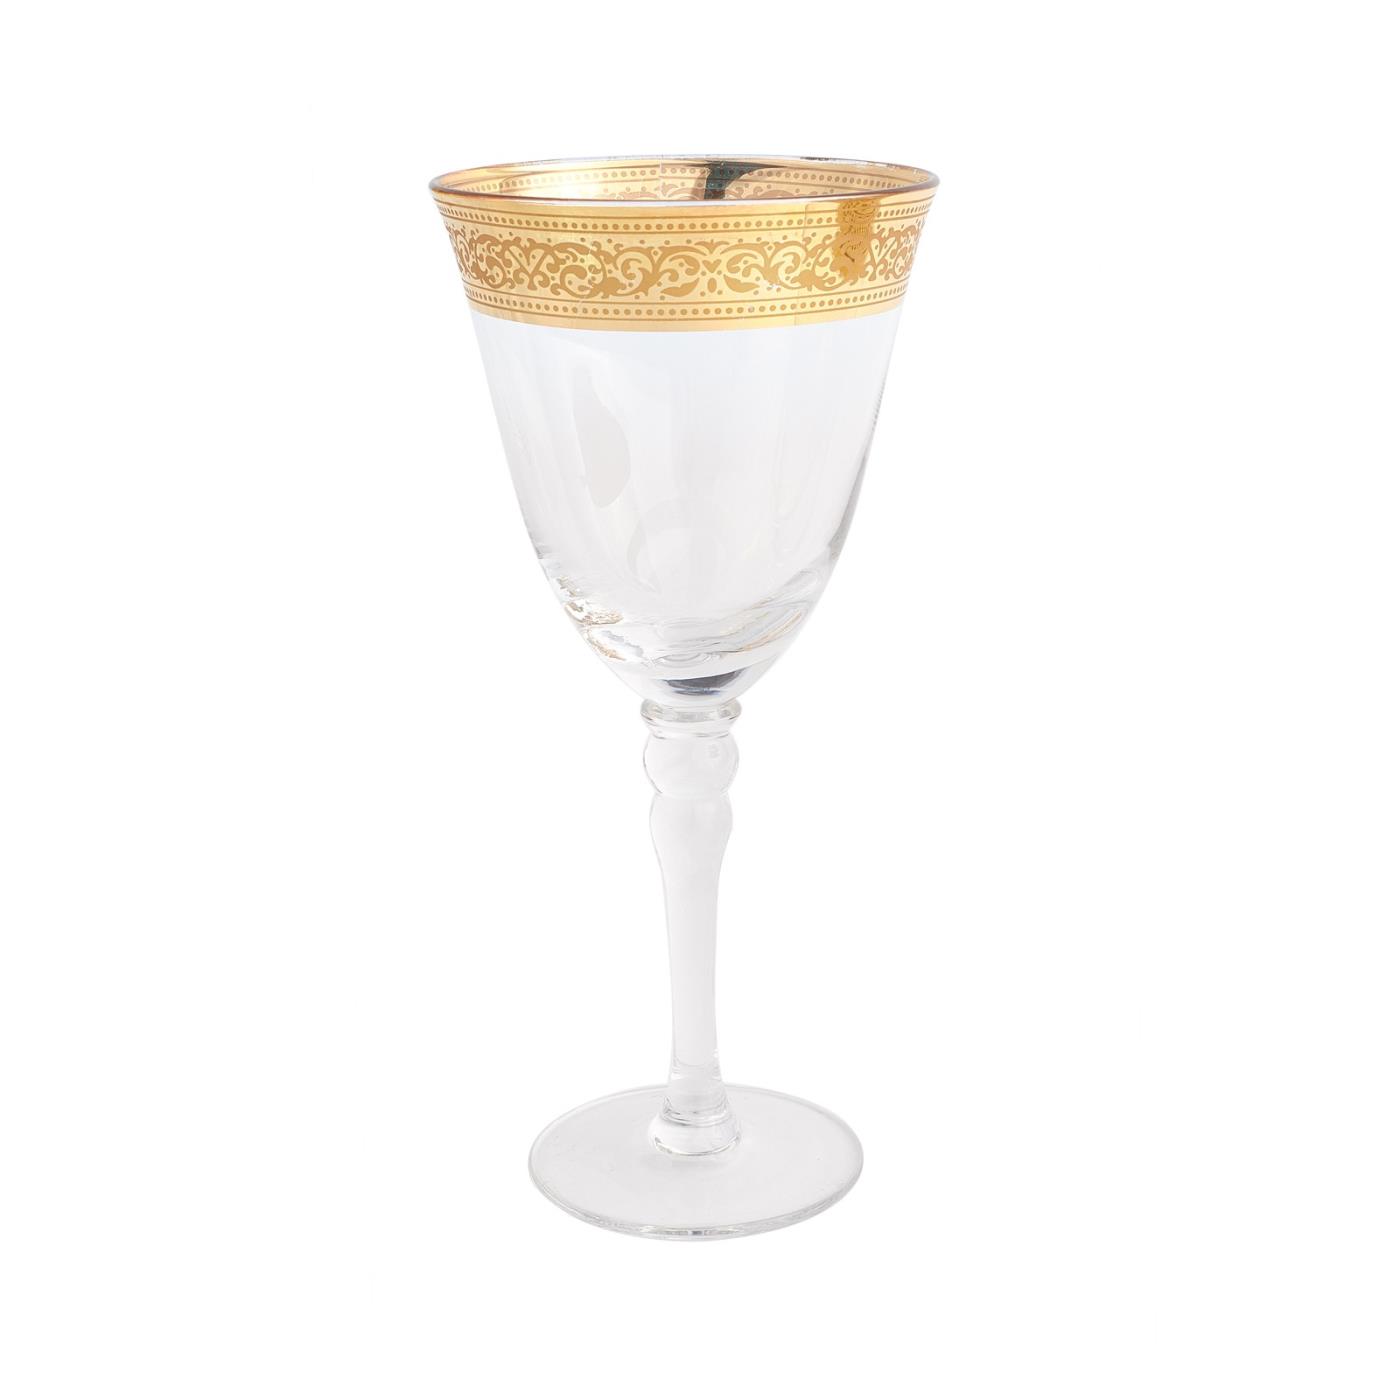 Majestic Gold Collection -  White Wine Glass 8 oz